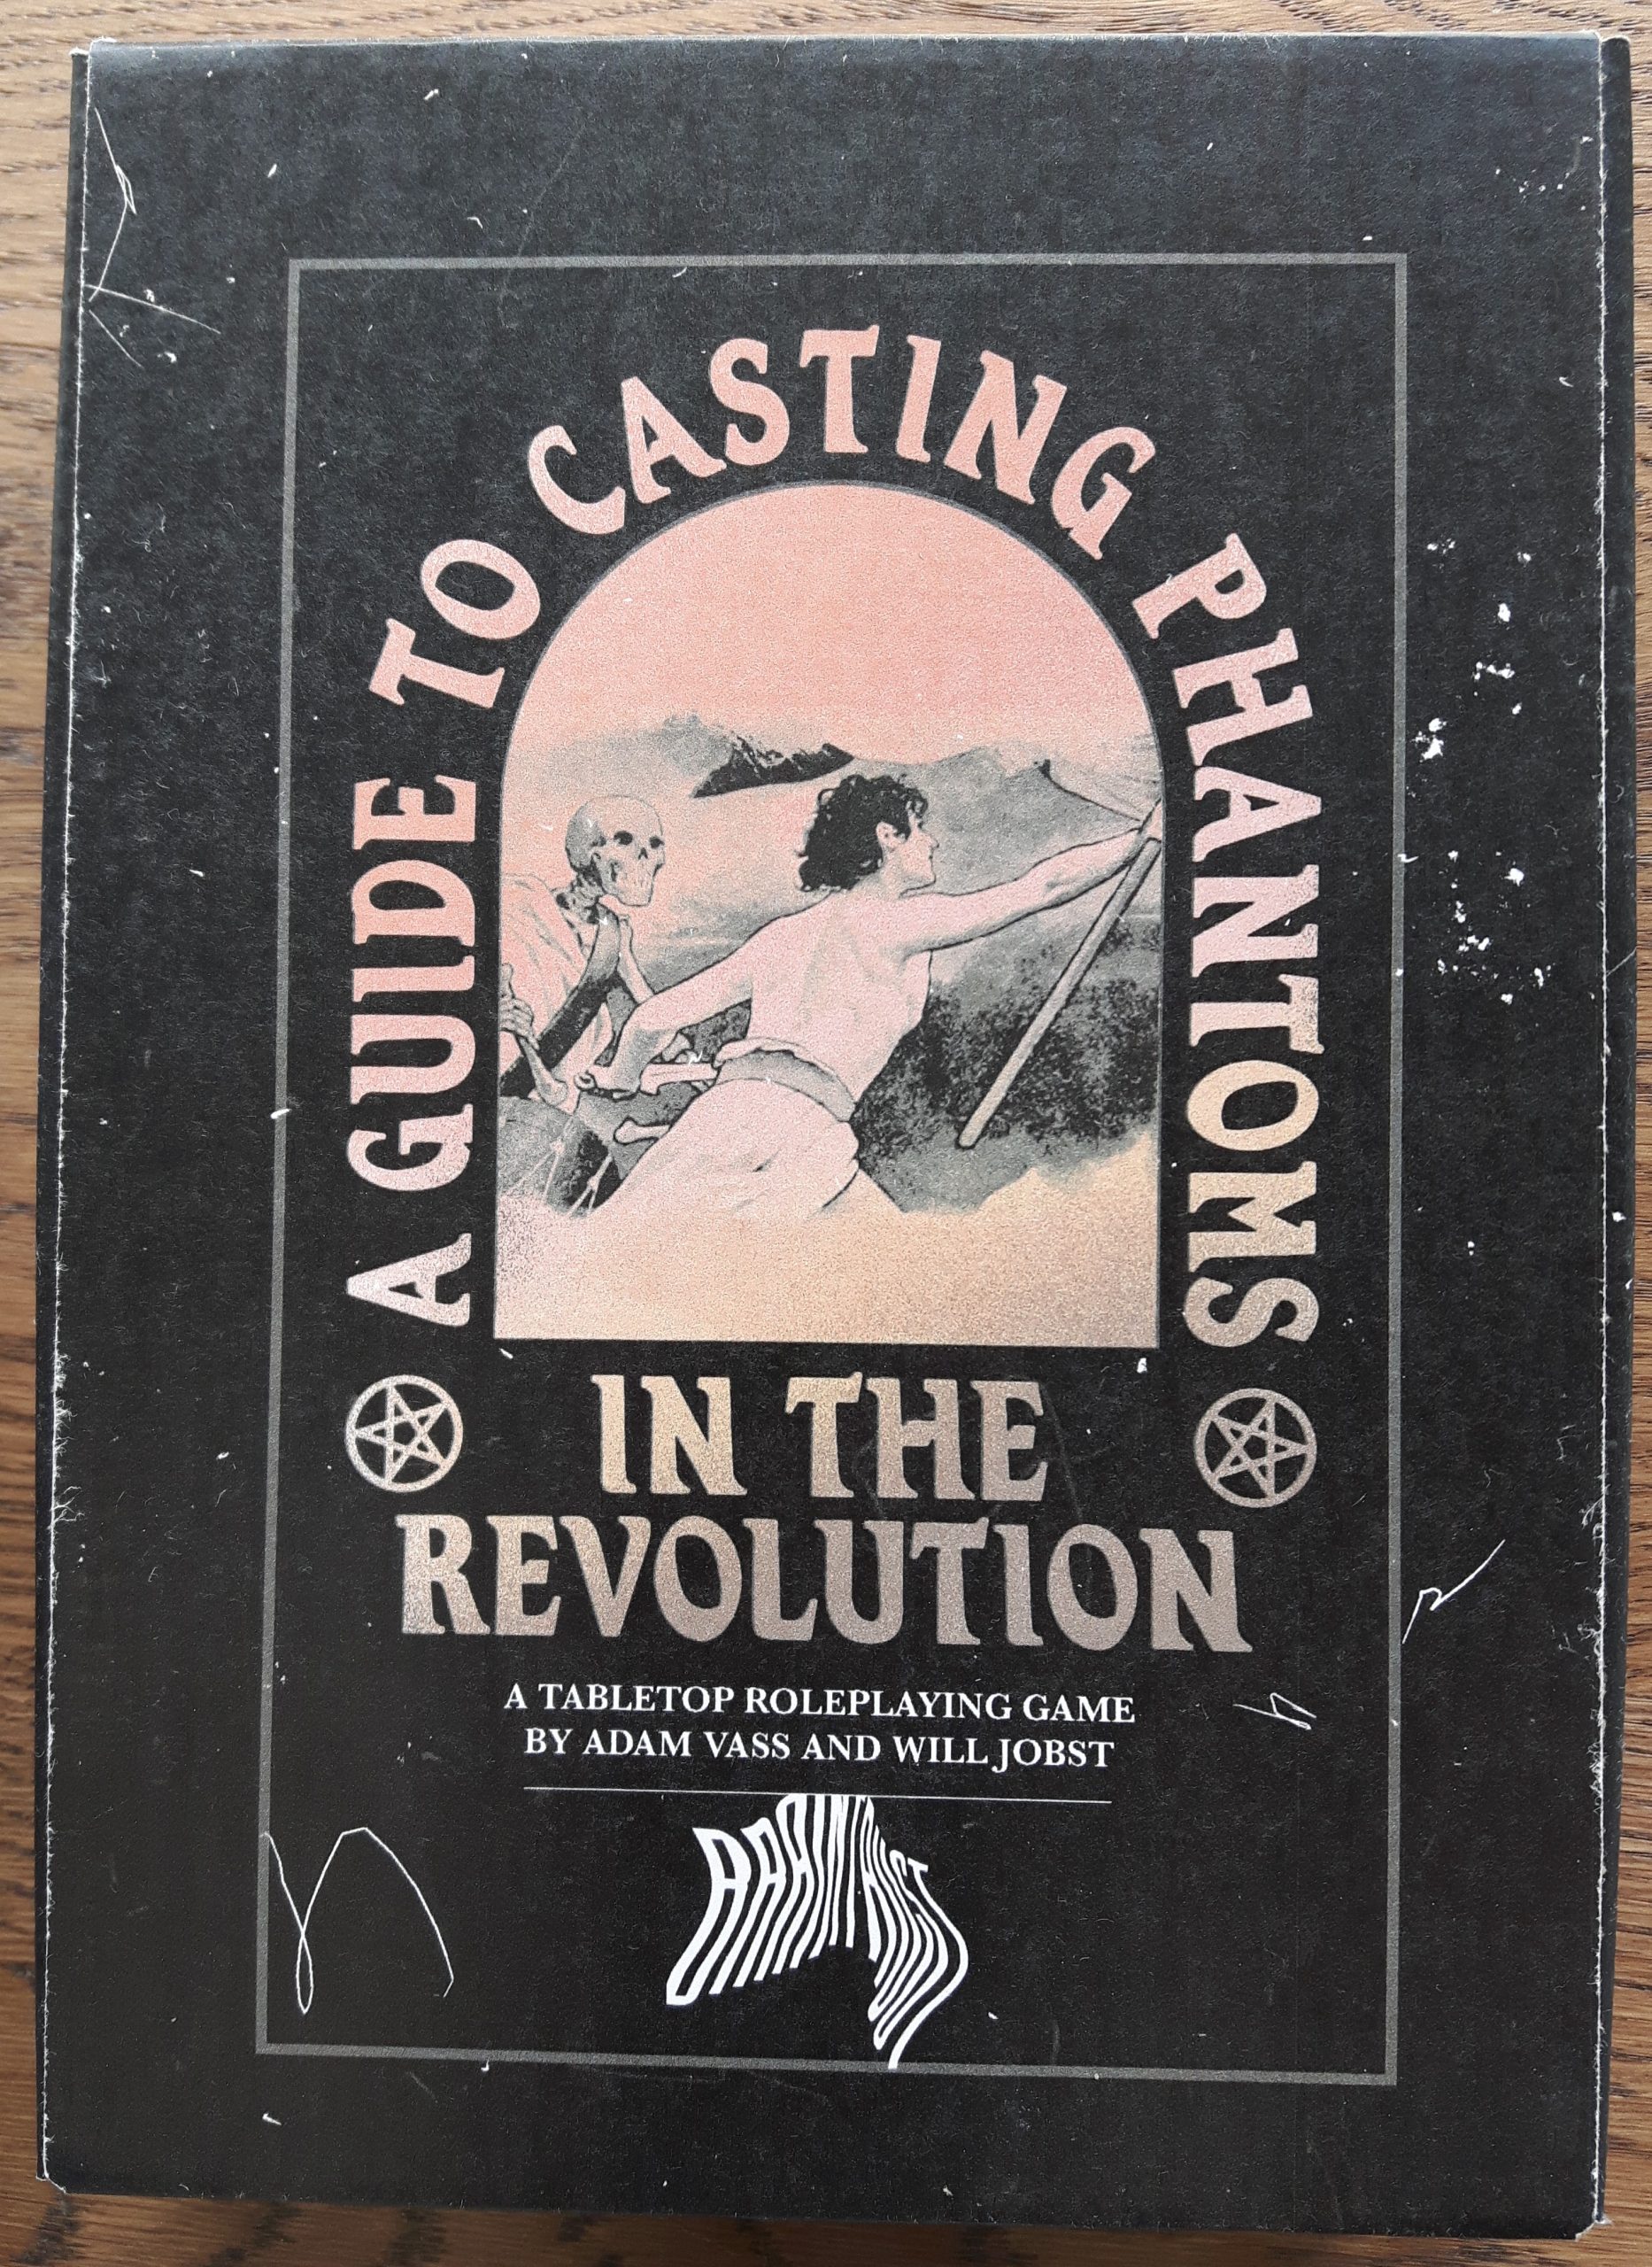 A Guide to Casting Phantoms in the Revolution